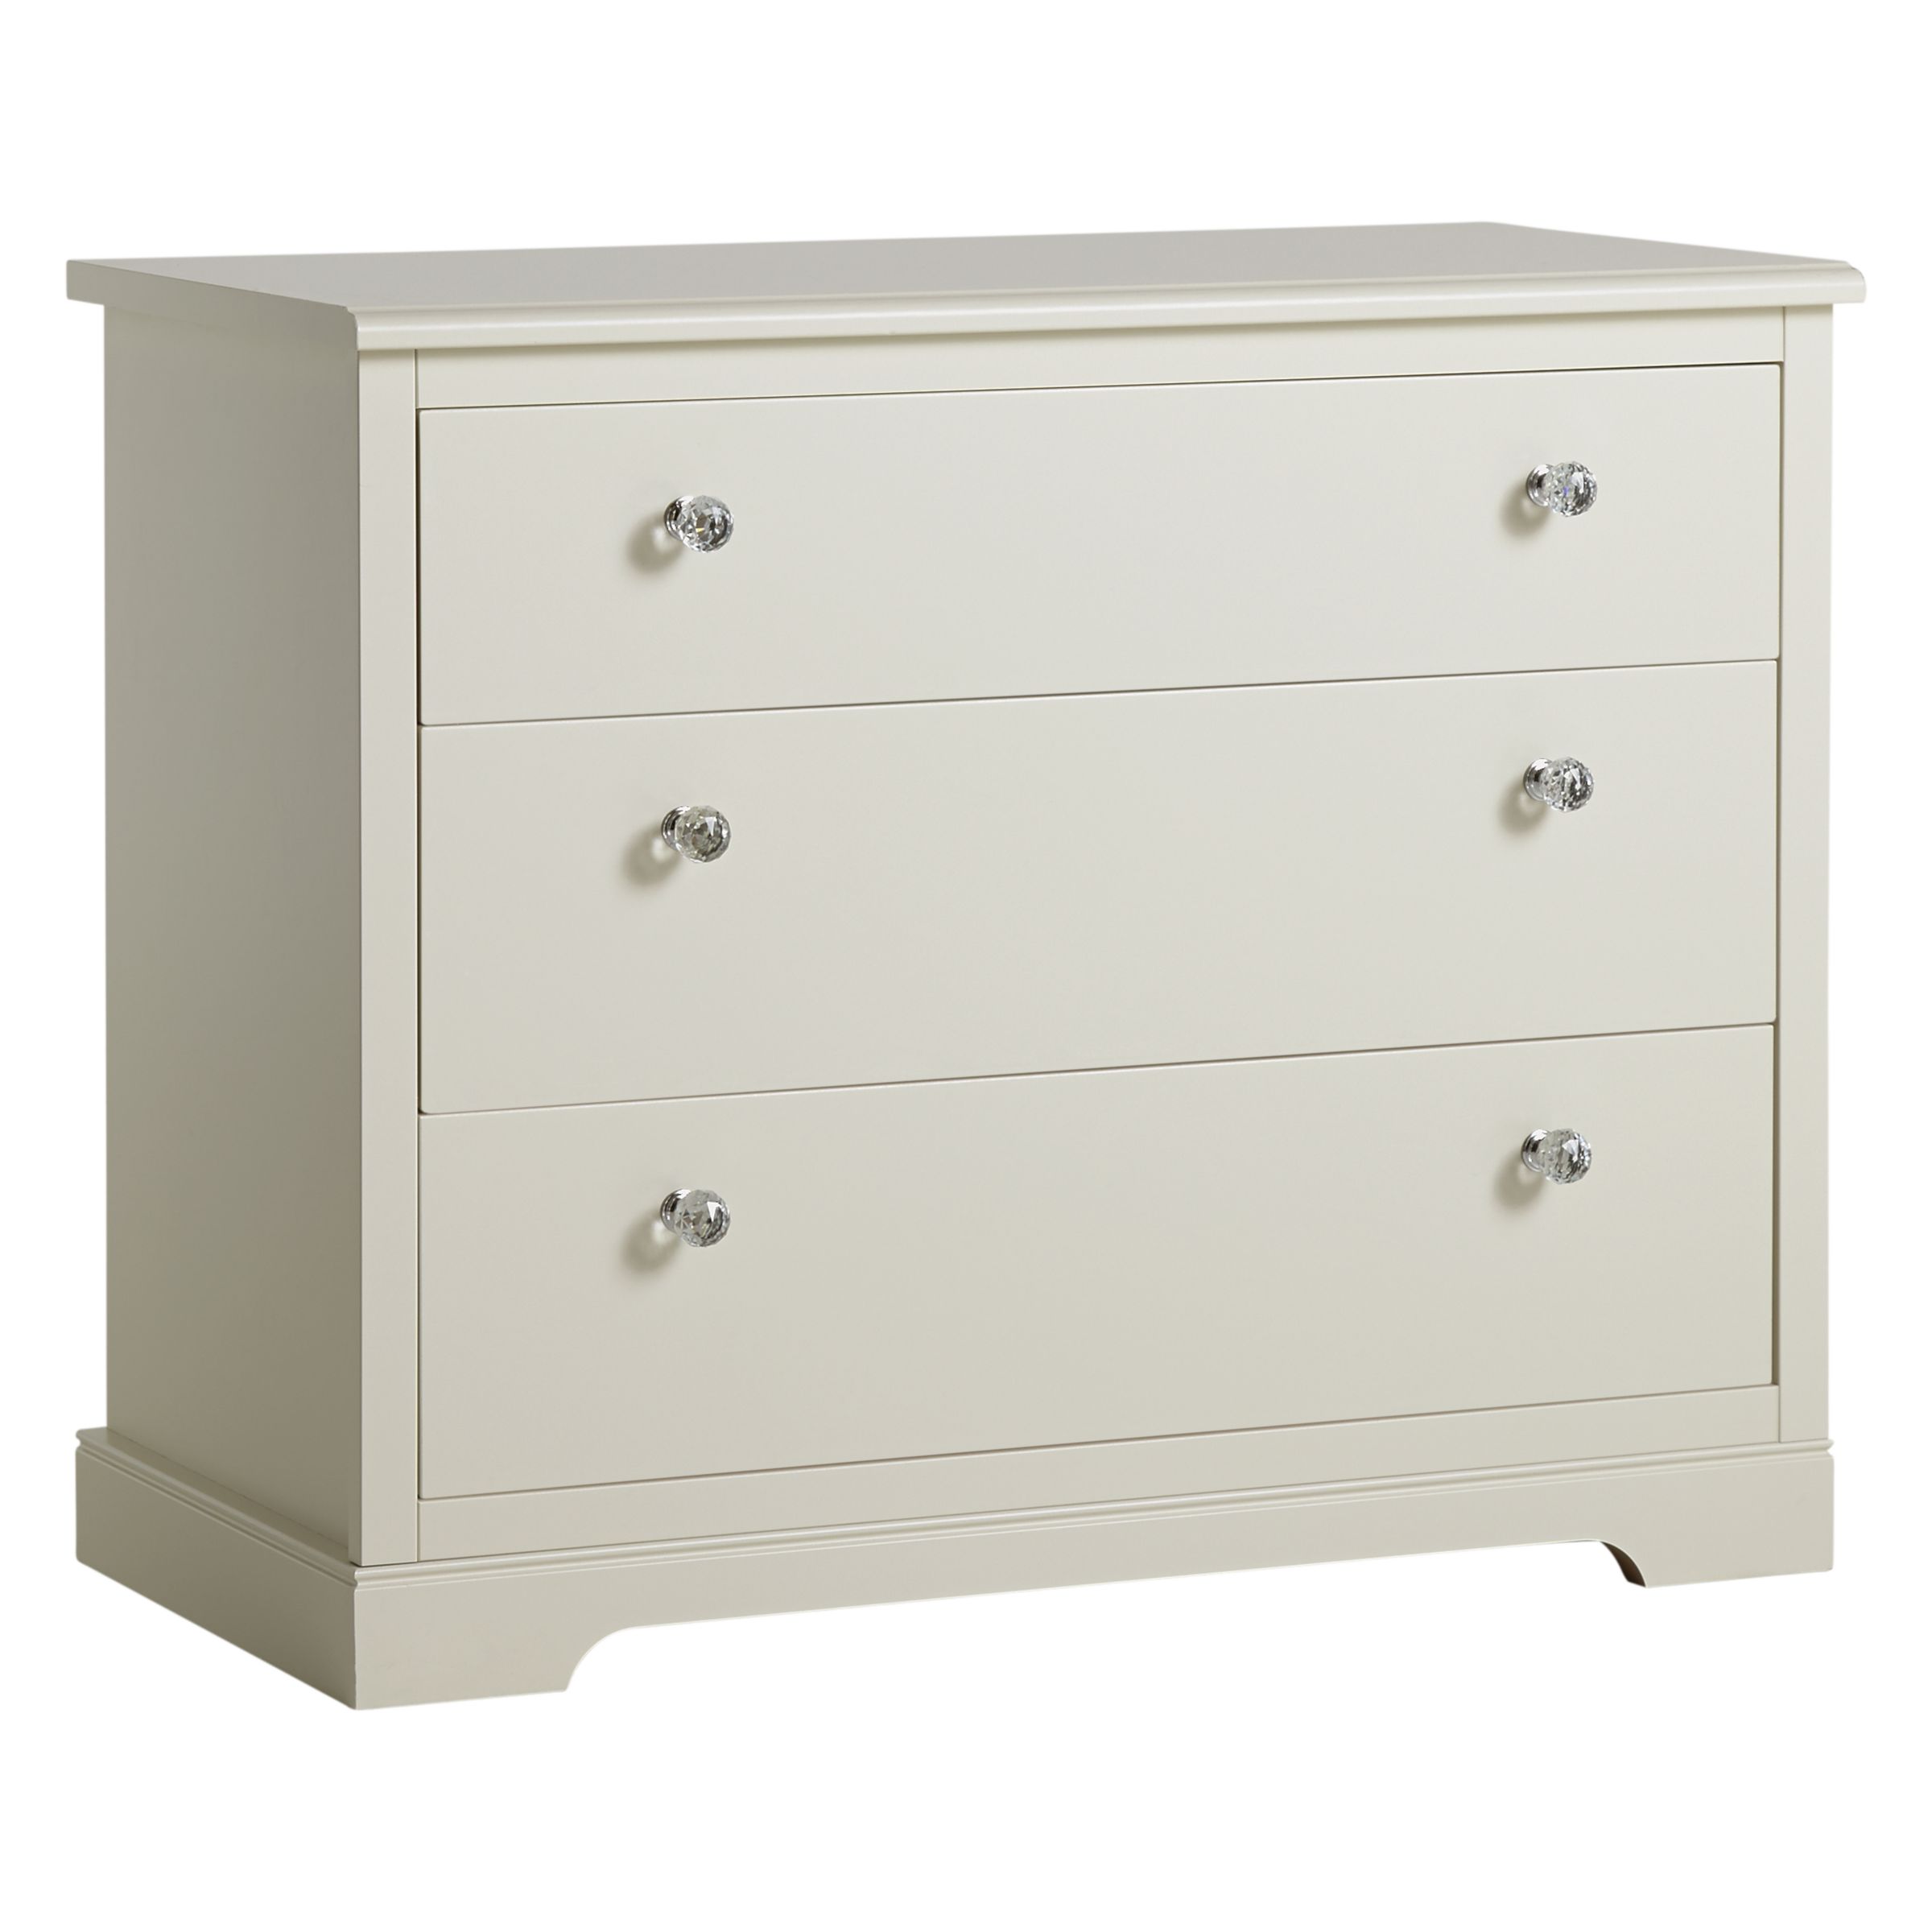 John Lewis Mix it Woburn/Hartland Crystal Handle Wide 3 Drawer Chest, Ivory